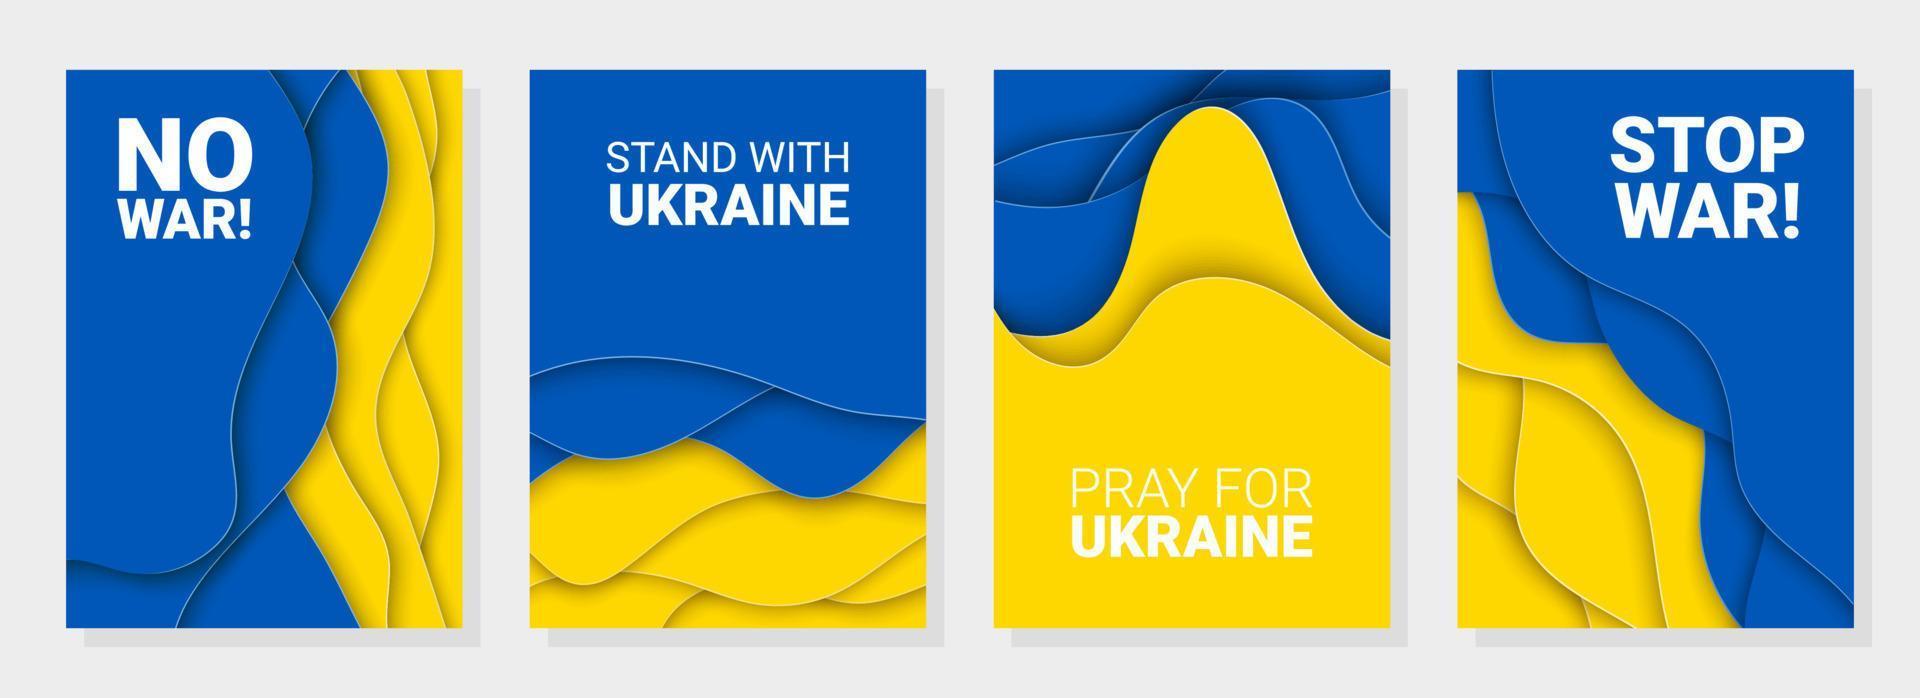 Vector paper cut background illustration of Pray For Ukraine, No War, Stand With Ukraine, Stop War concept with prohibition sign on Ukraine flag colors. No war and military attack in Ukraine poster.